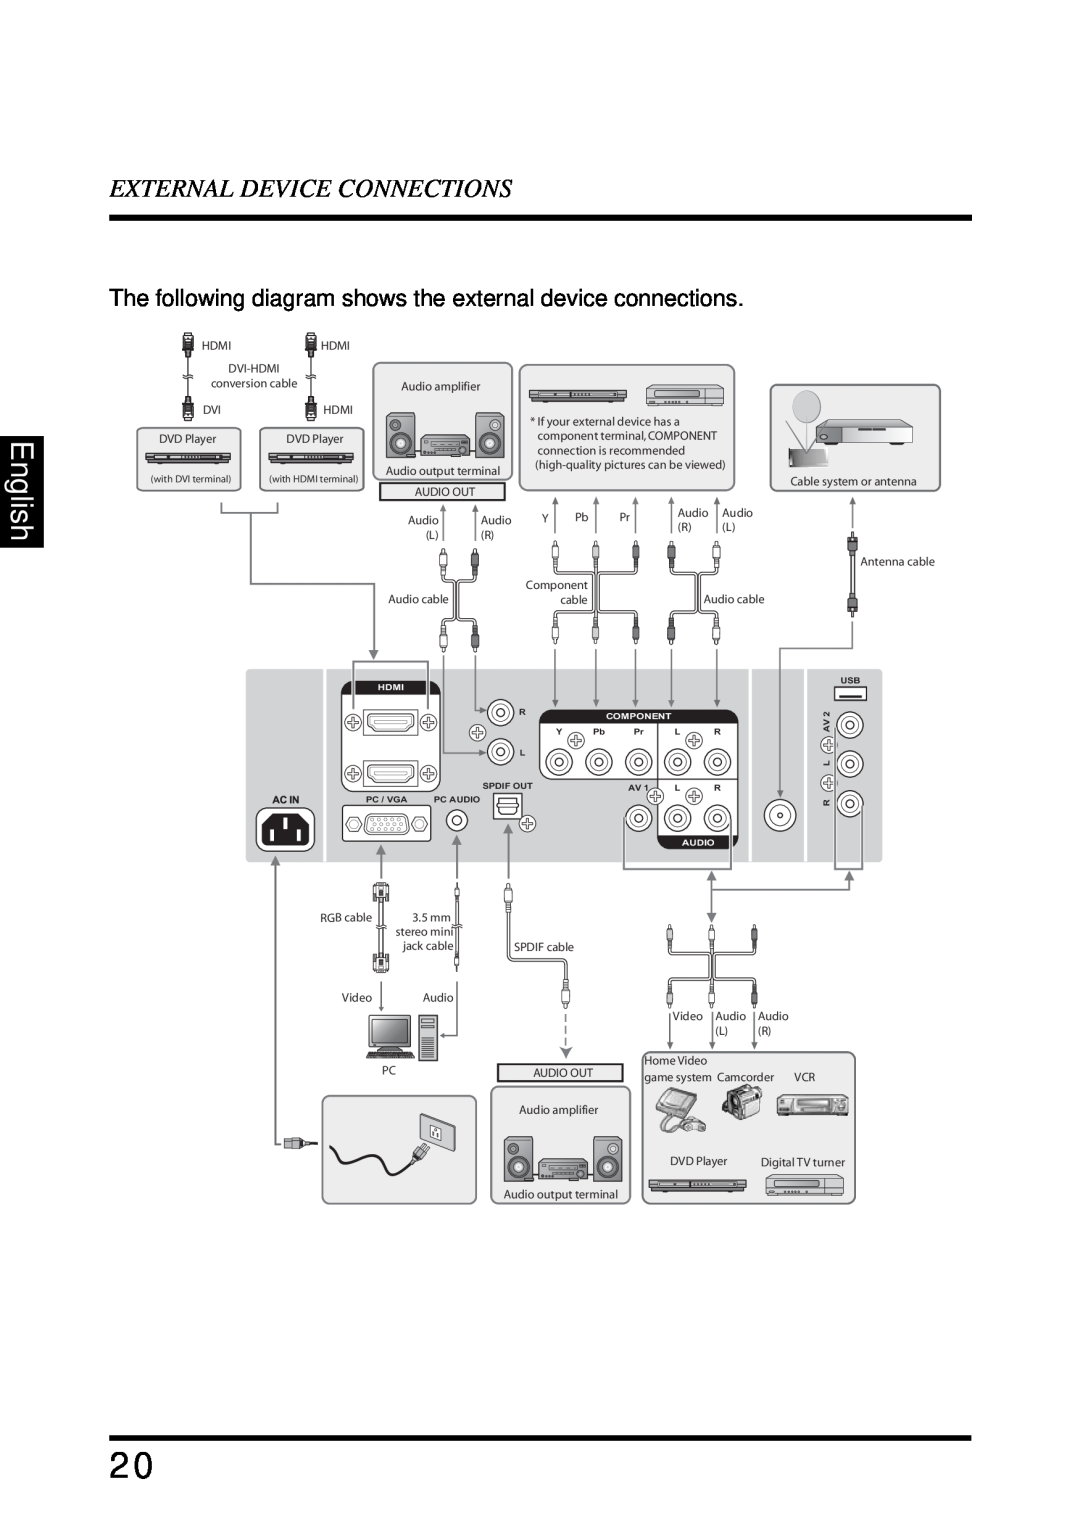 Westinghouse SK-32H640G English, External Device Connections, The following diagram shows the external device connections 